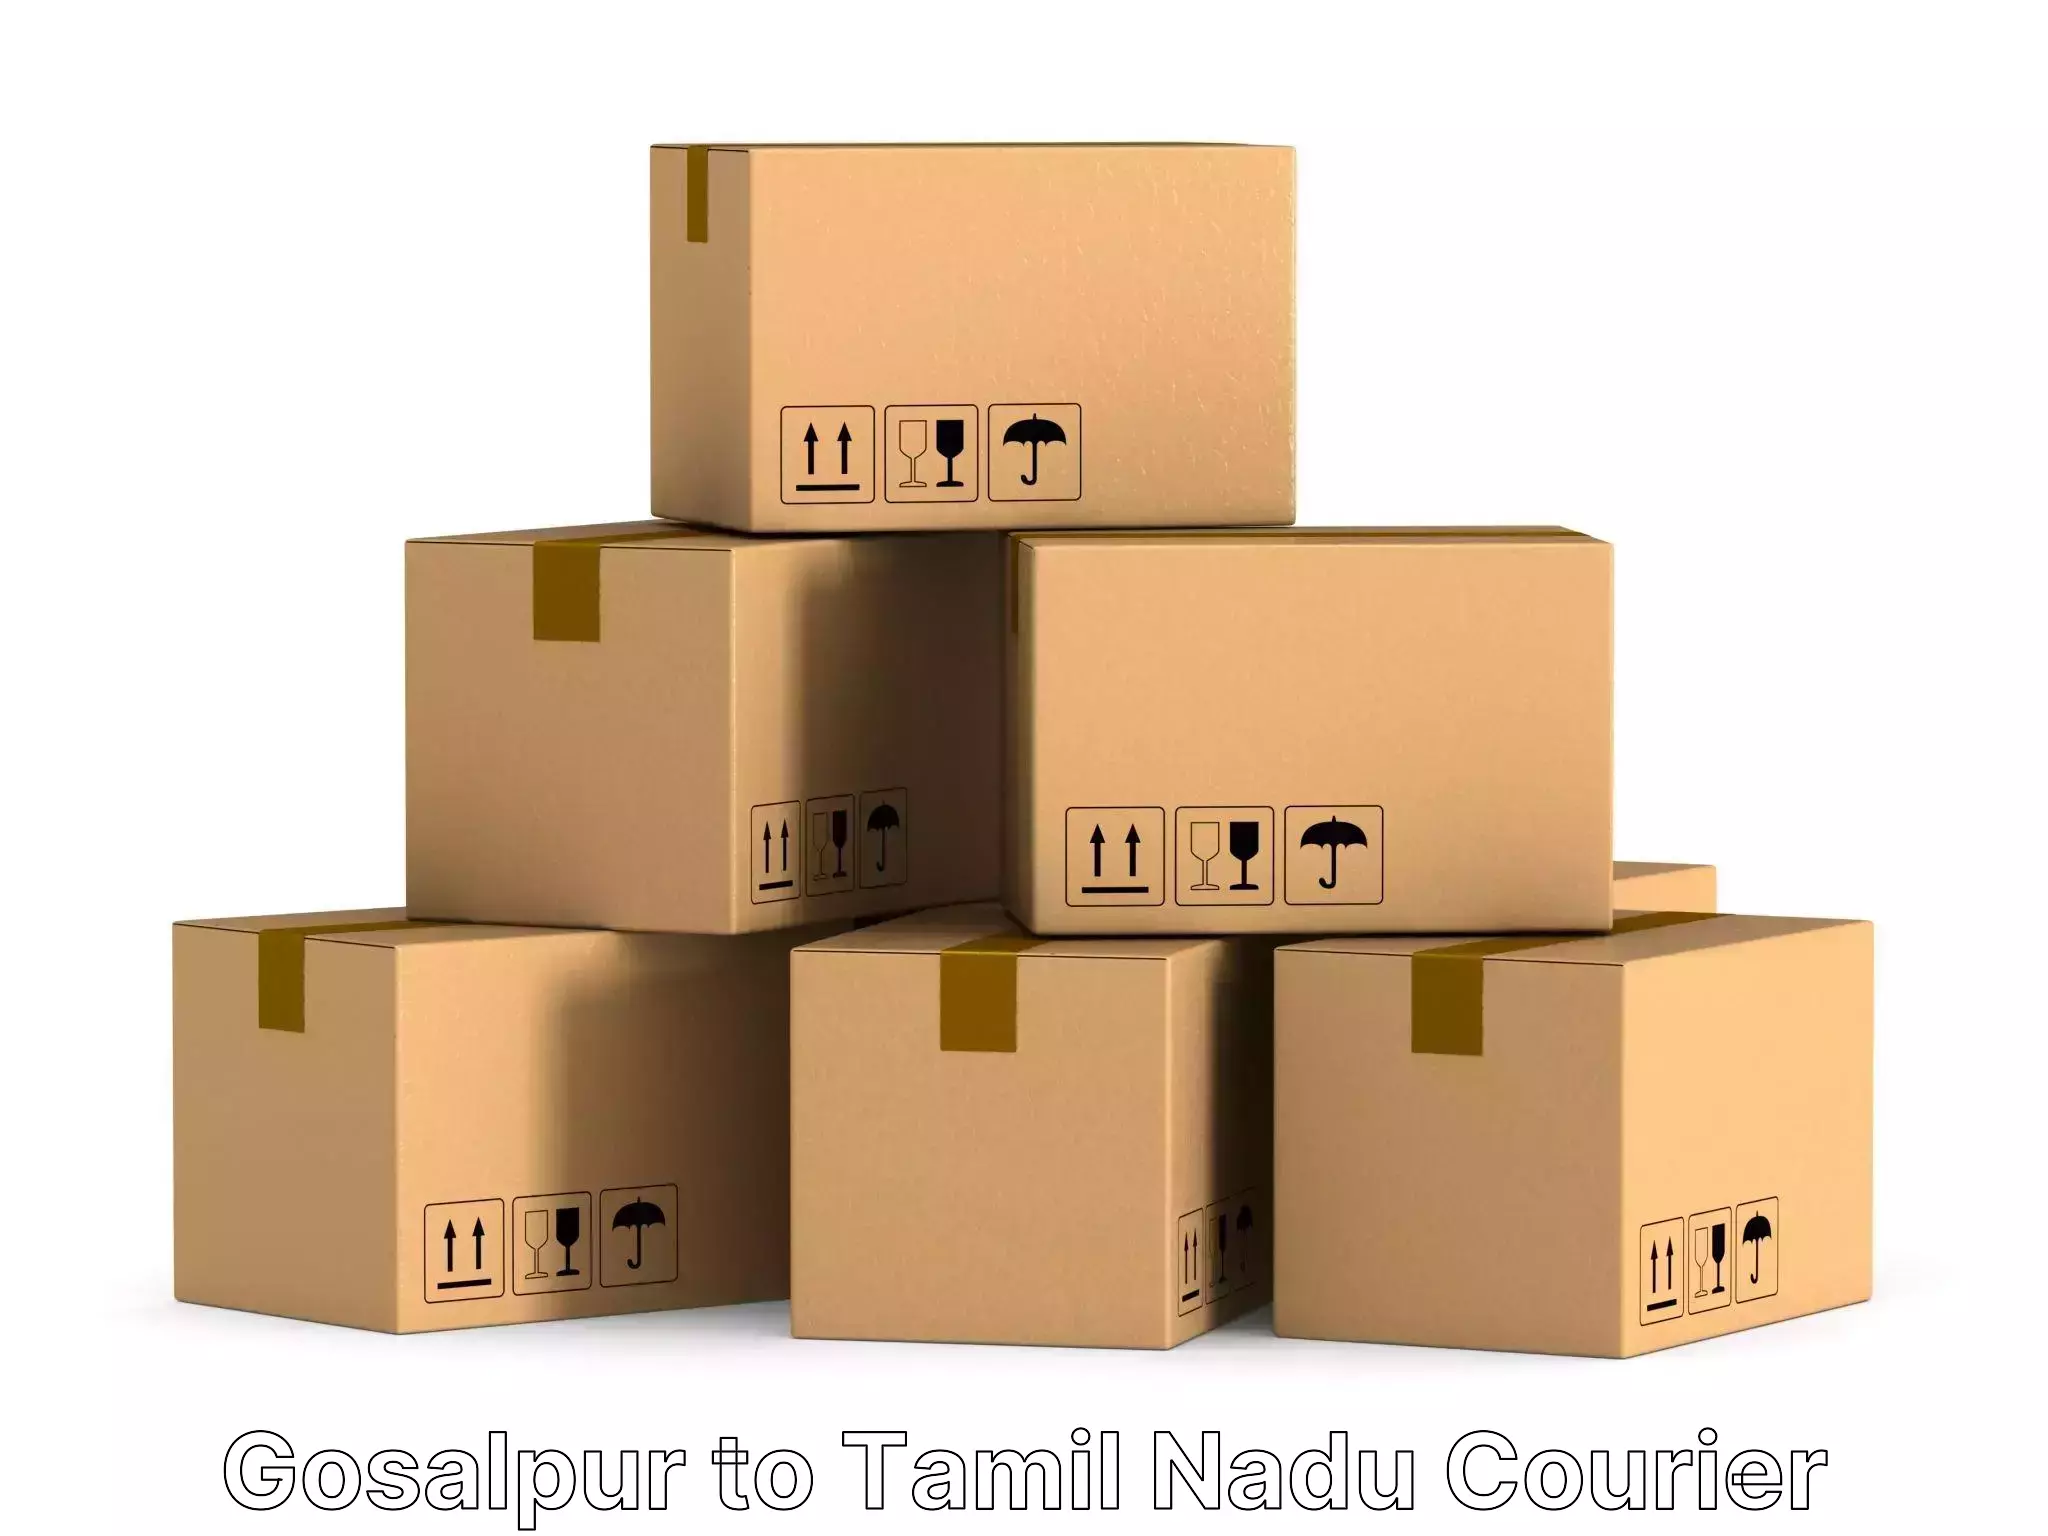 Furniture moving assistance Gosalpur to Vellore Institute of Technology